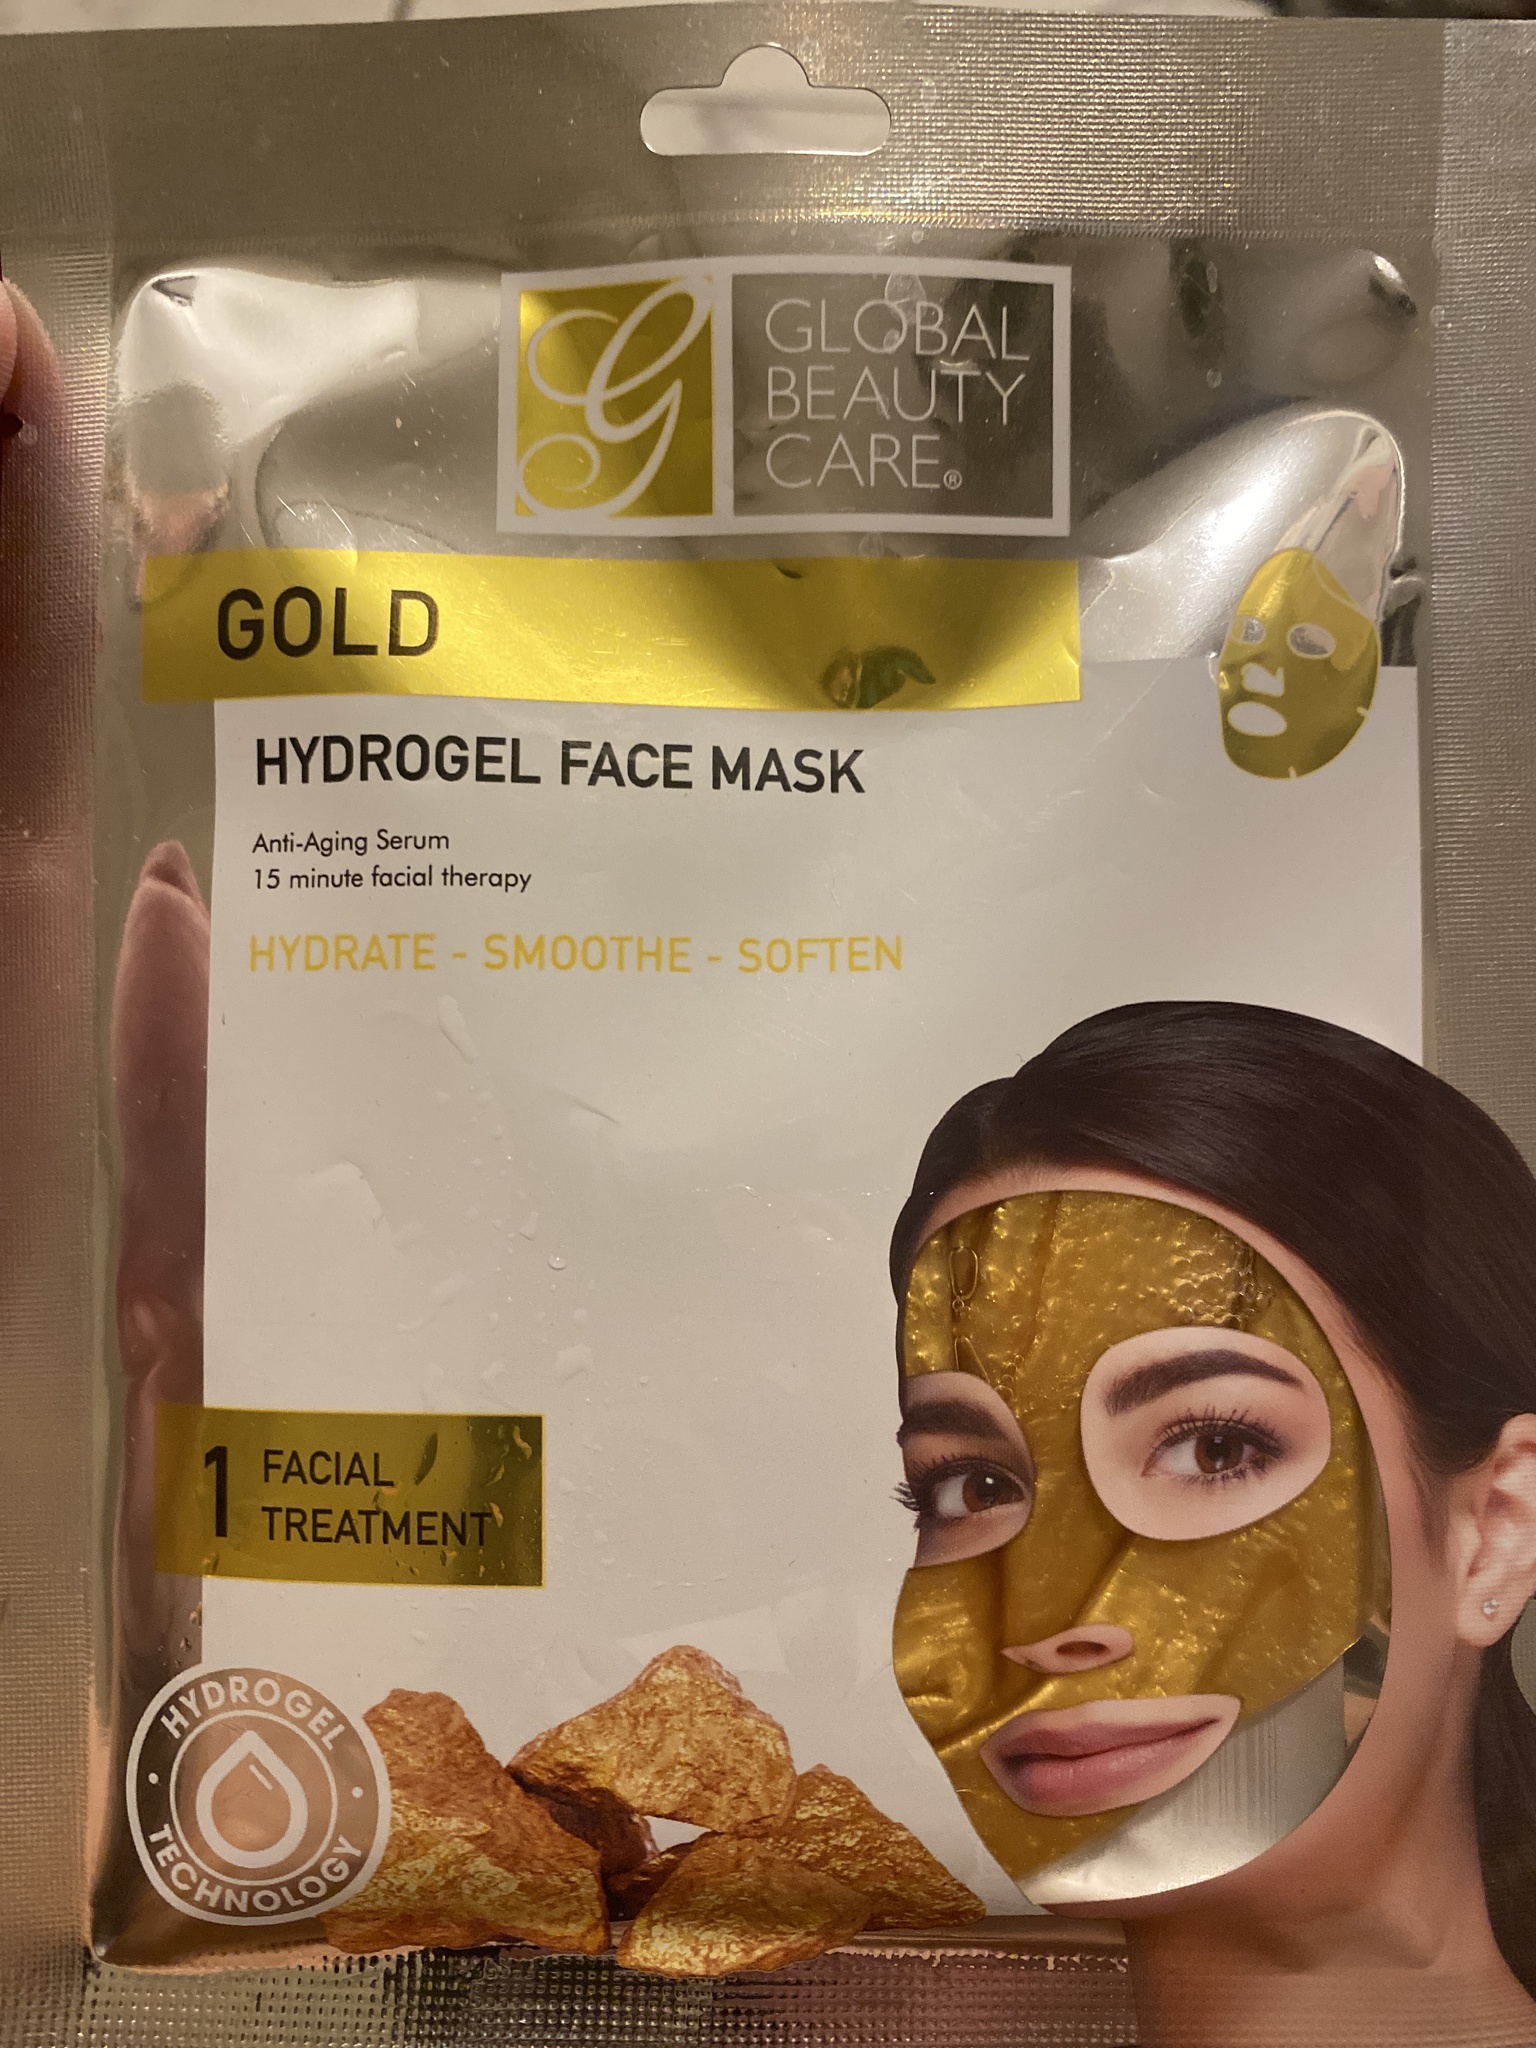 Global Beauty Care Gold Hydrogel Face Mask